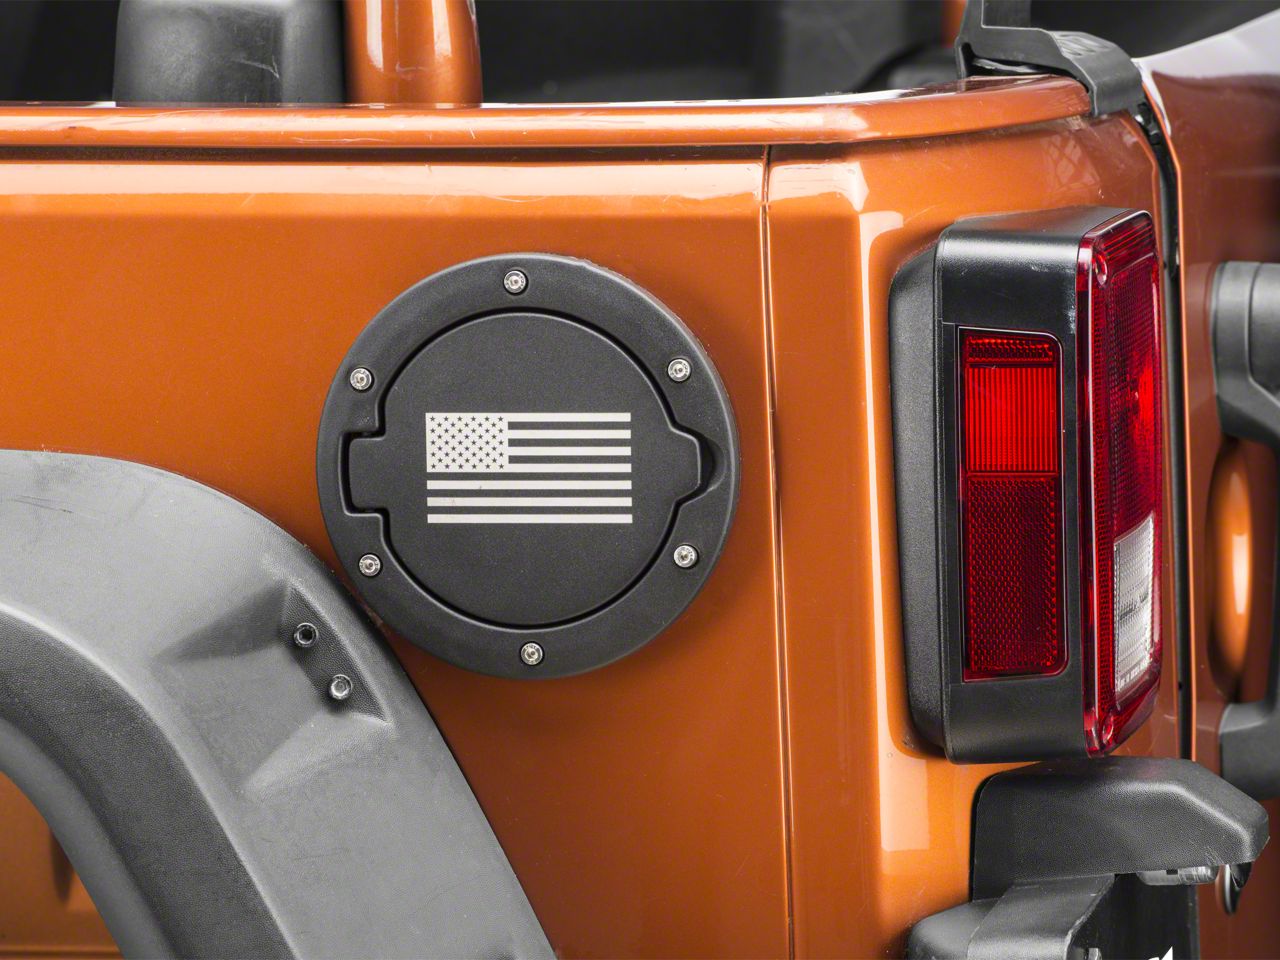 How to Install RedRock 4x4 Old Glory Fuel Door Cover - Textured Black on  your Wrangler | ExtremeTerrain